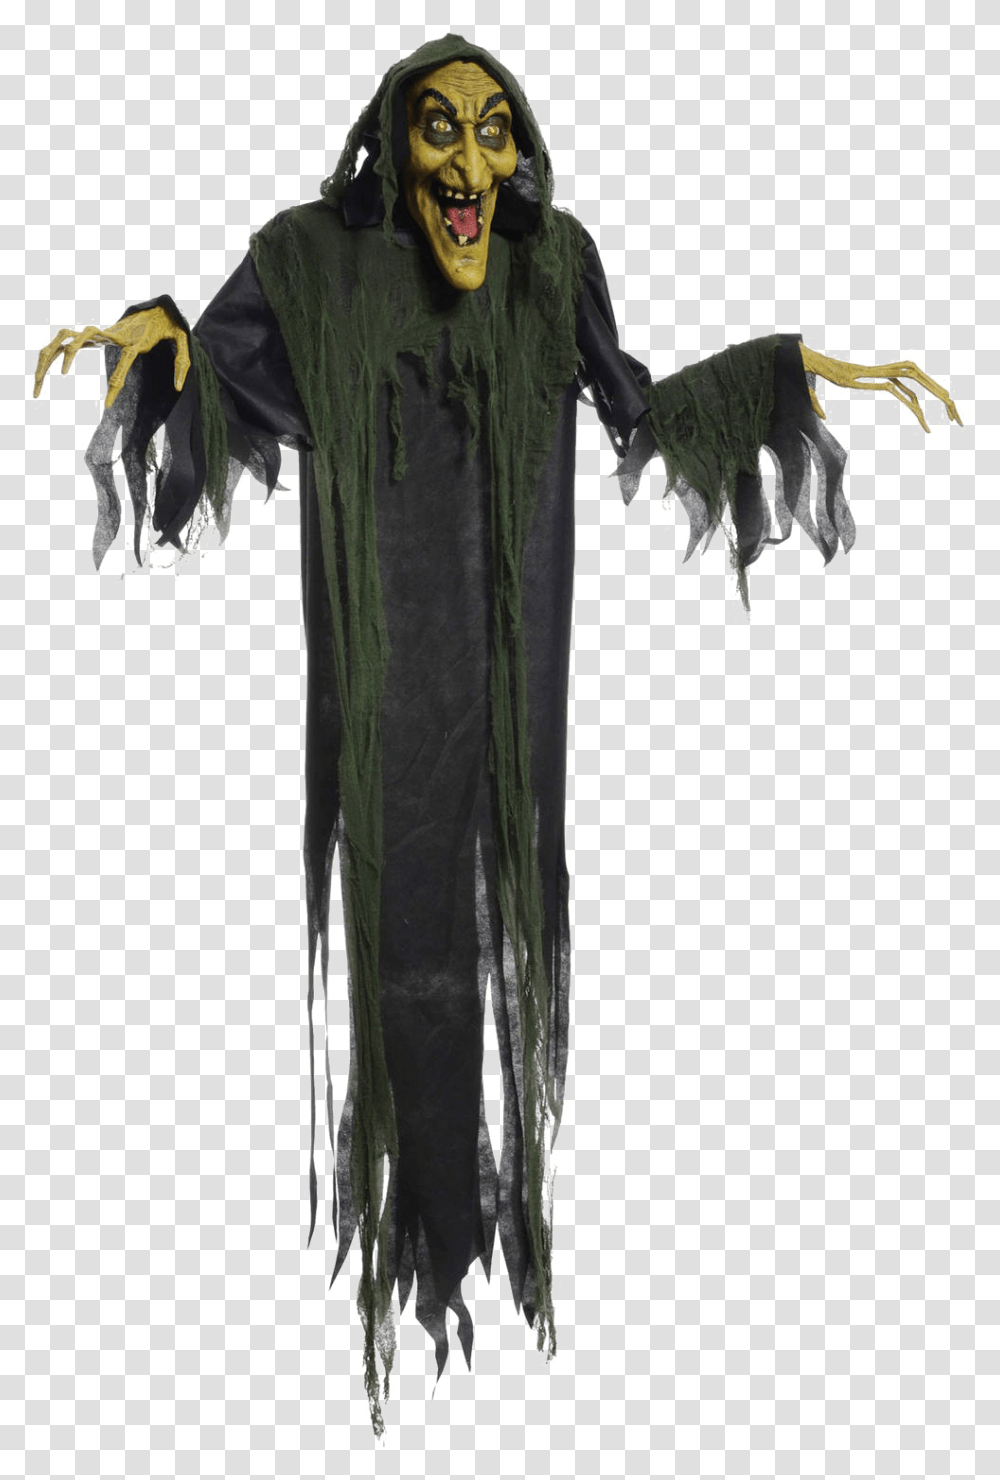 Creepy Witch Image Scary Witch, Statue, Sculpture, Art, Cross Transparent Png